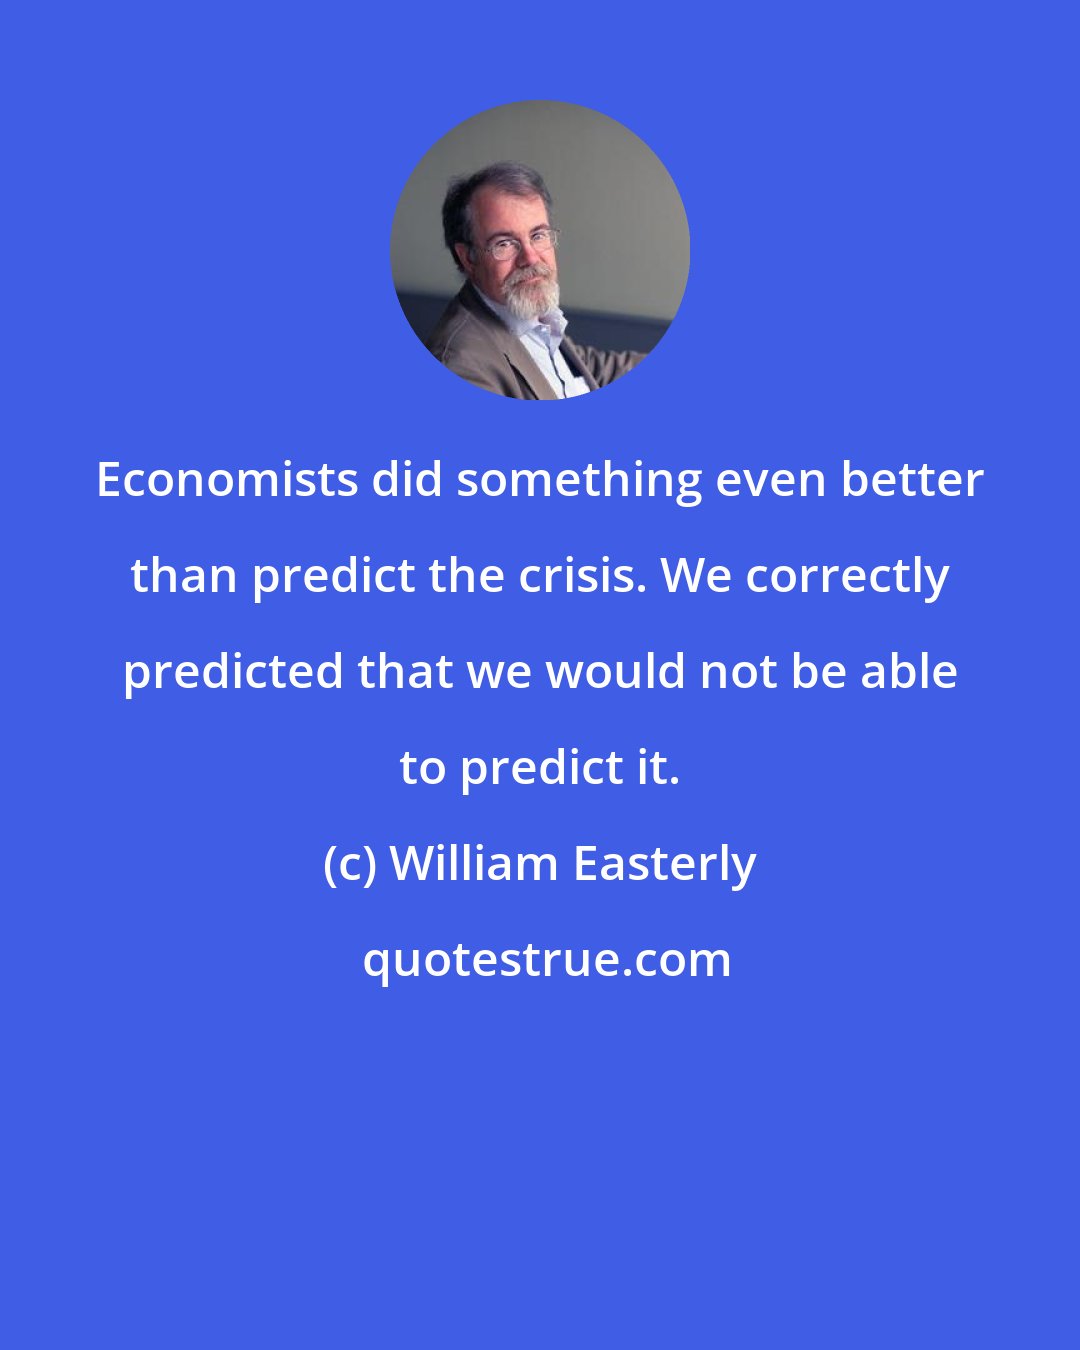 William Easterly: Economists did something even better than predict the crisis. We correctly predicted that we would not be able to predict it.